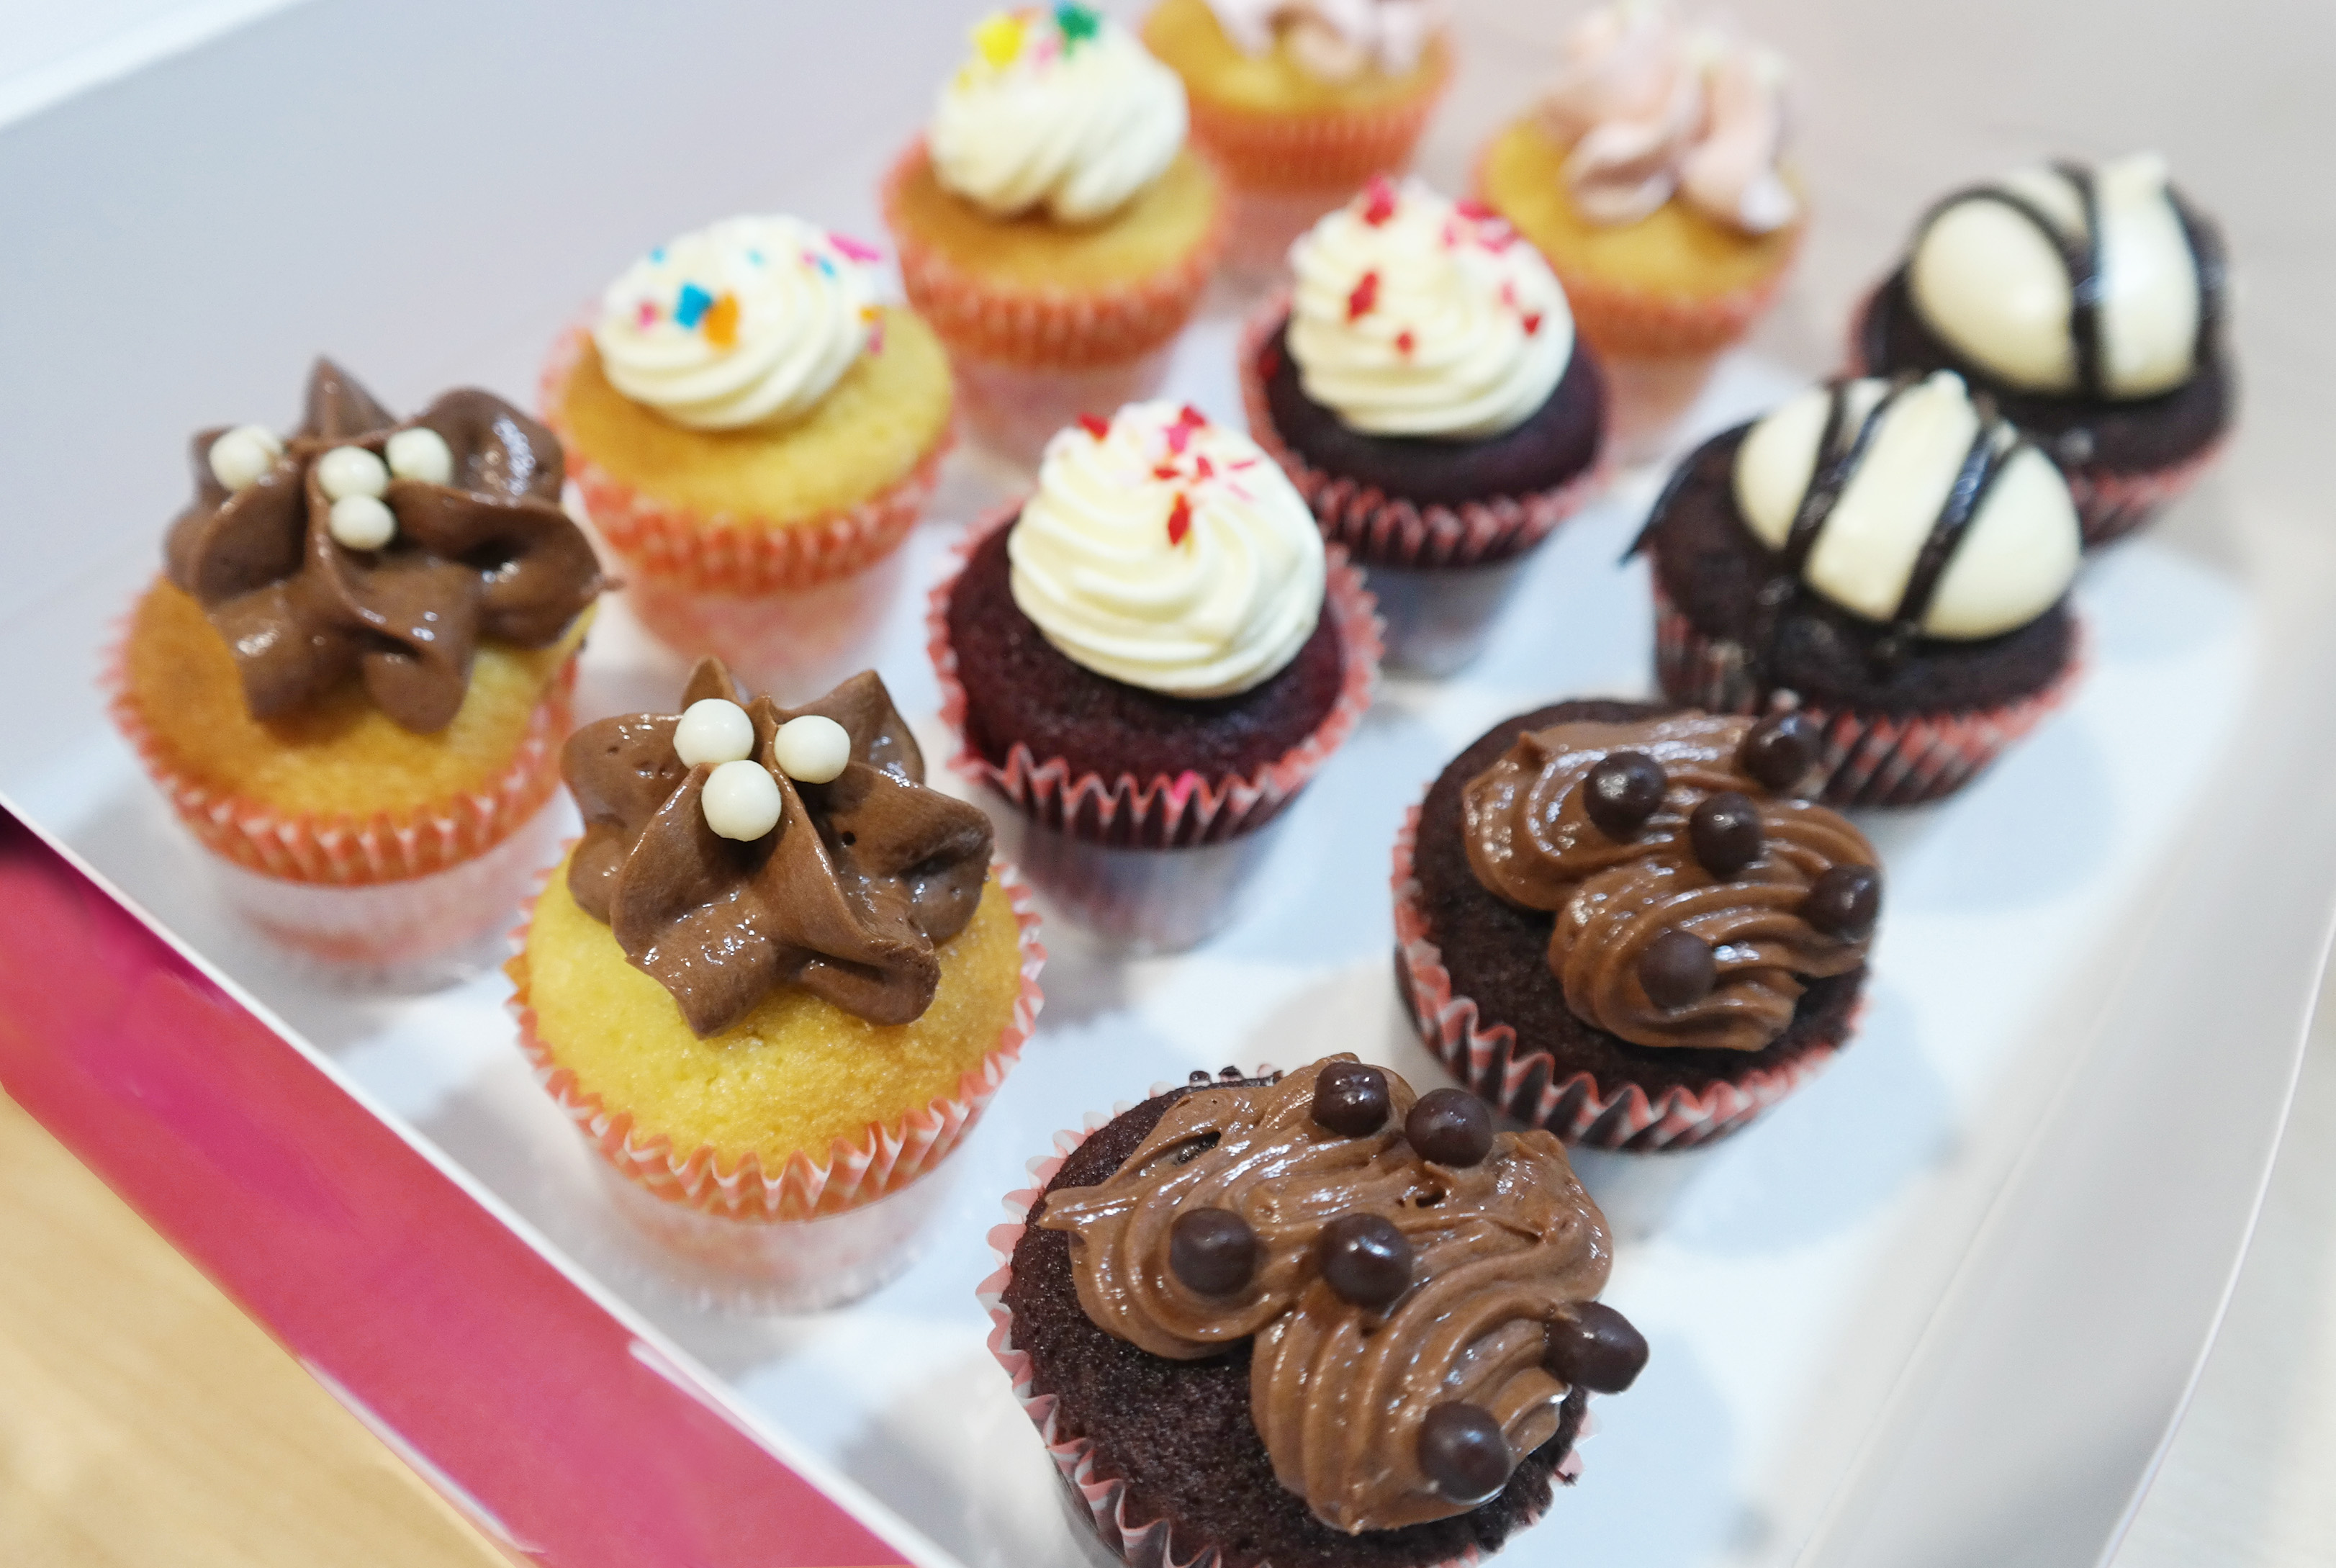 About Twelve Cupcakes